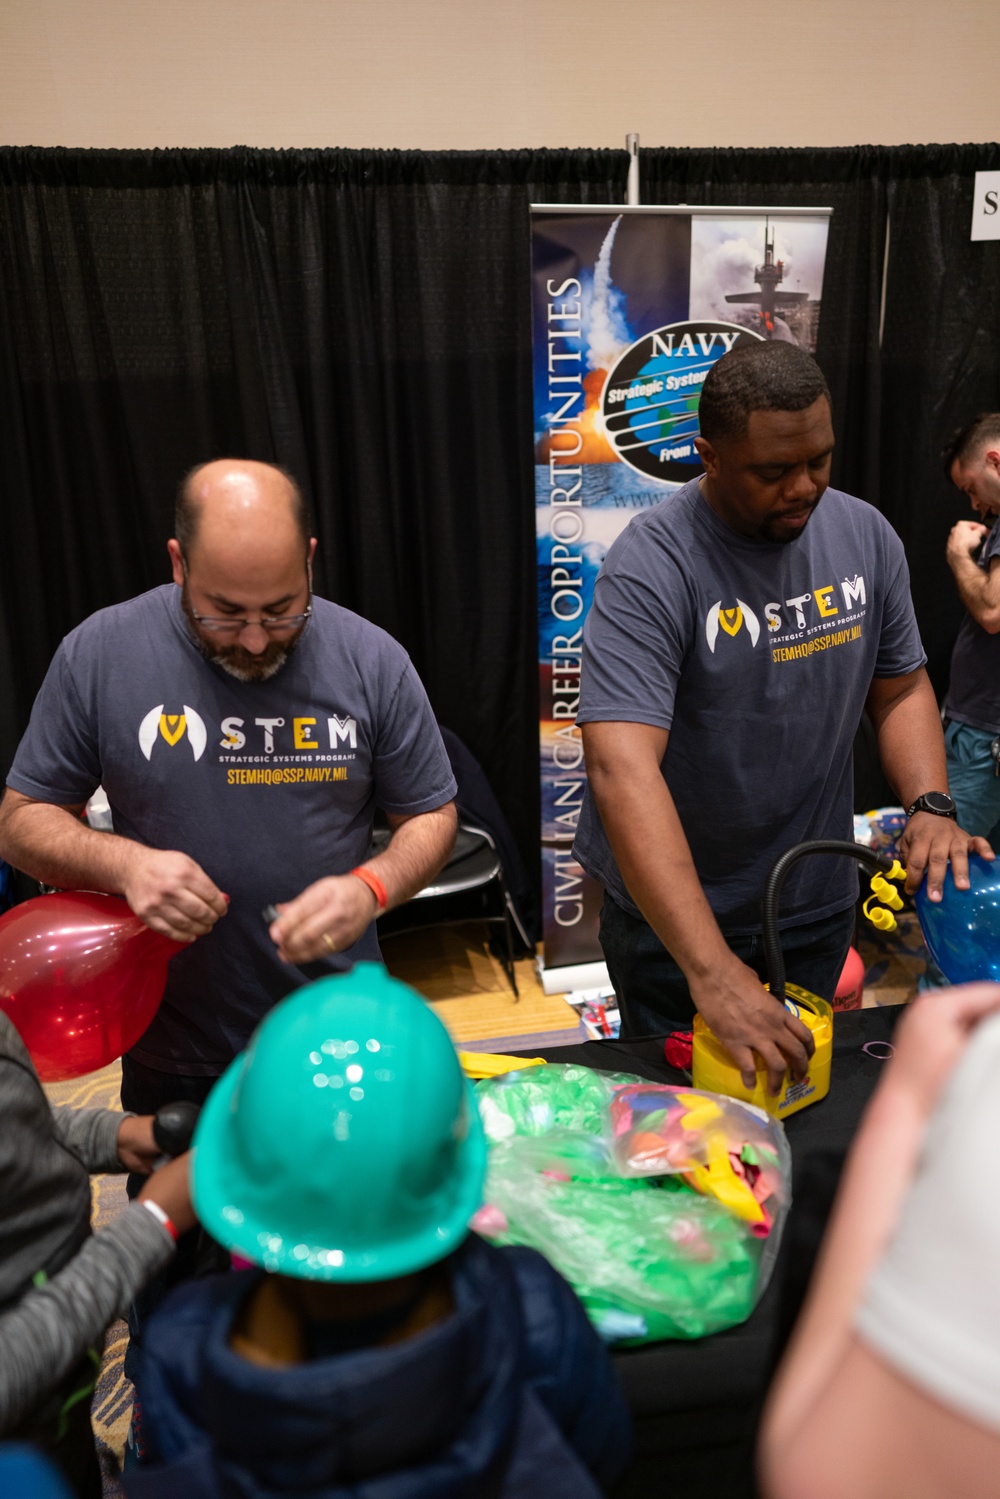 U.S. Navy’s SSP Empowers Students with STEM Learning Activities at Navy League’s Sea-Air-Space Expo